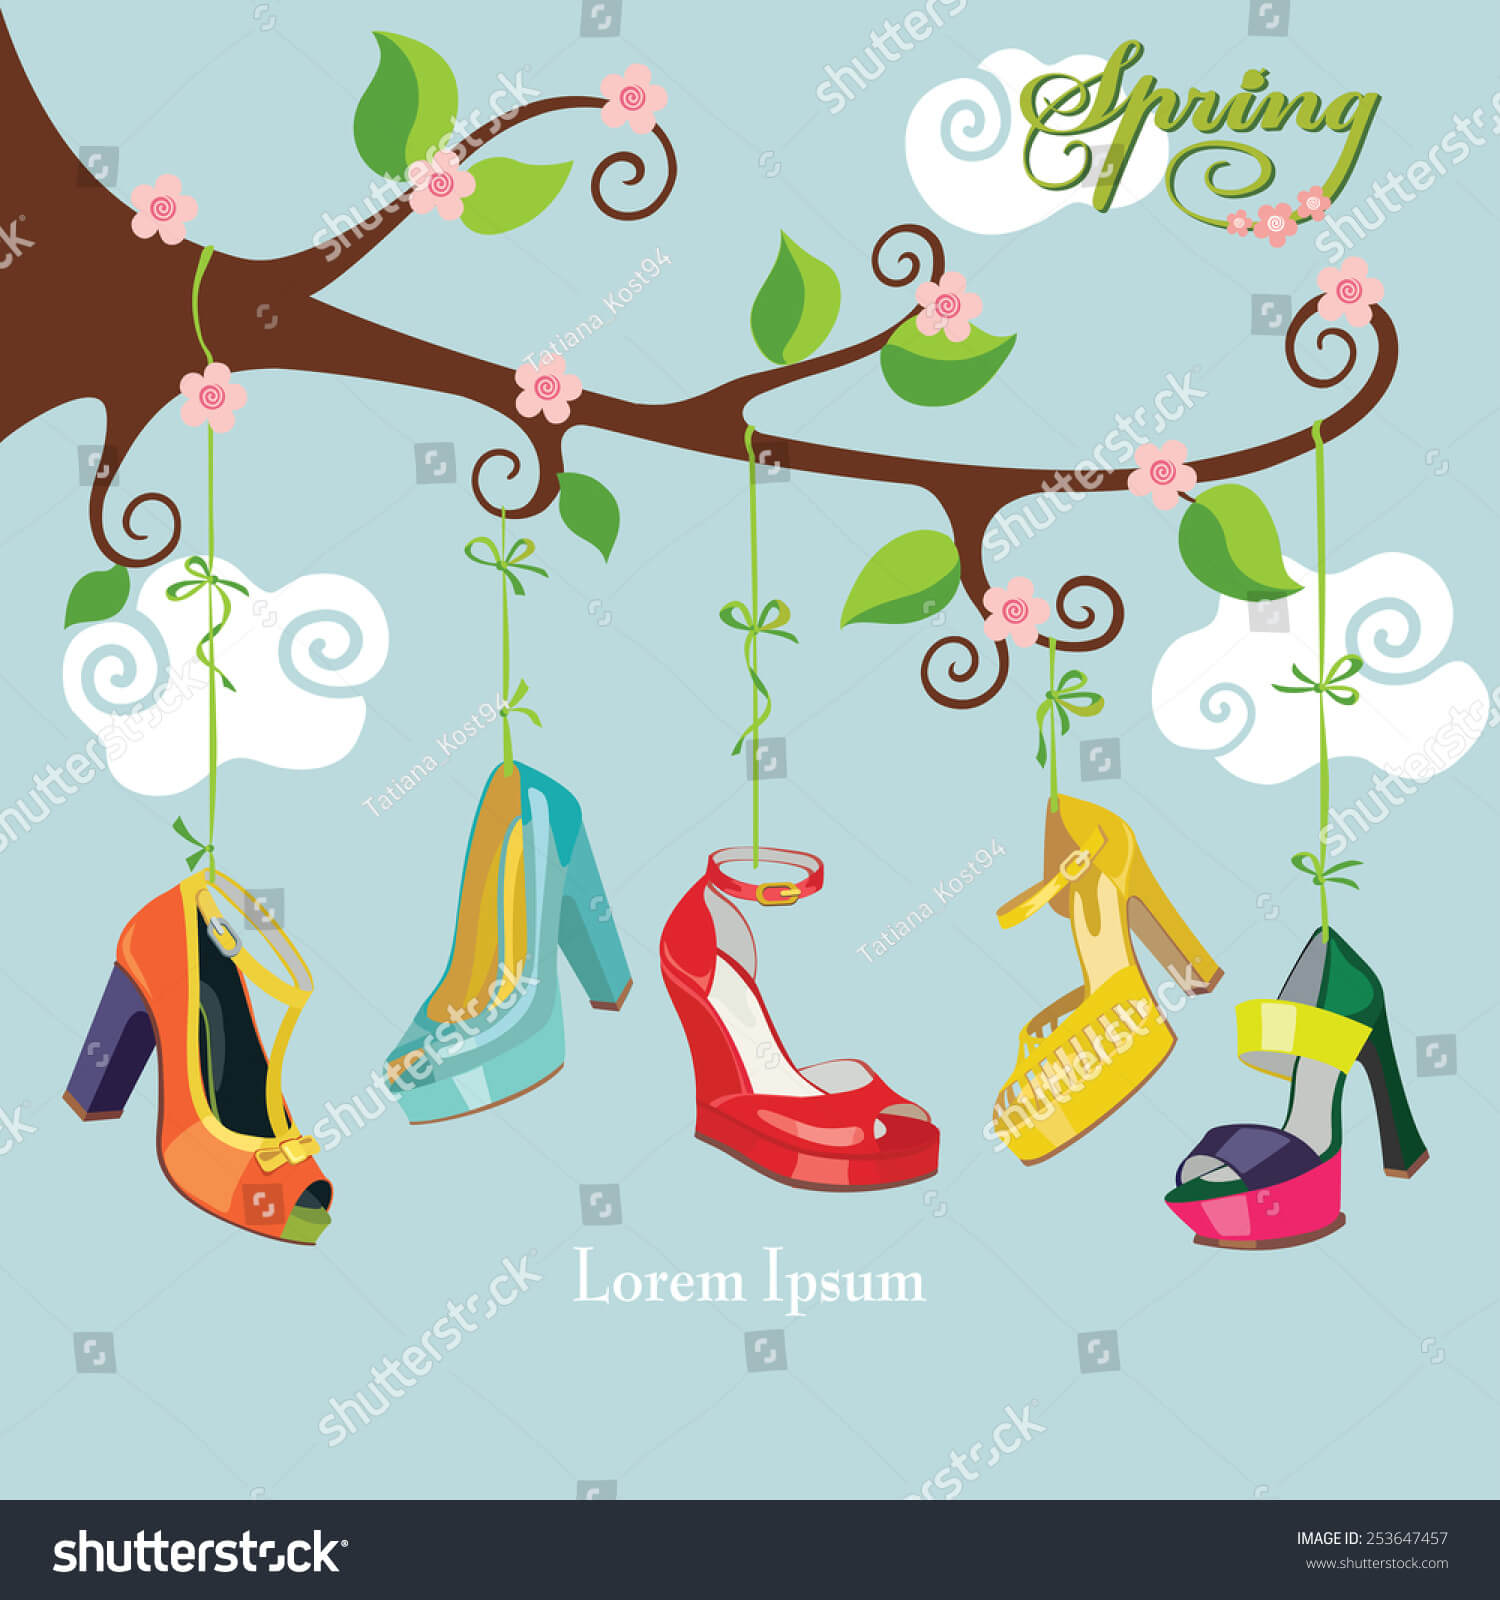 Vector Spring Cardflowering Branch Colored High Stock Vector Regarding High Heel Template For Cards